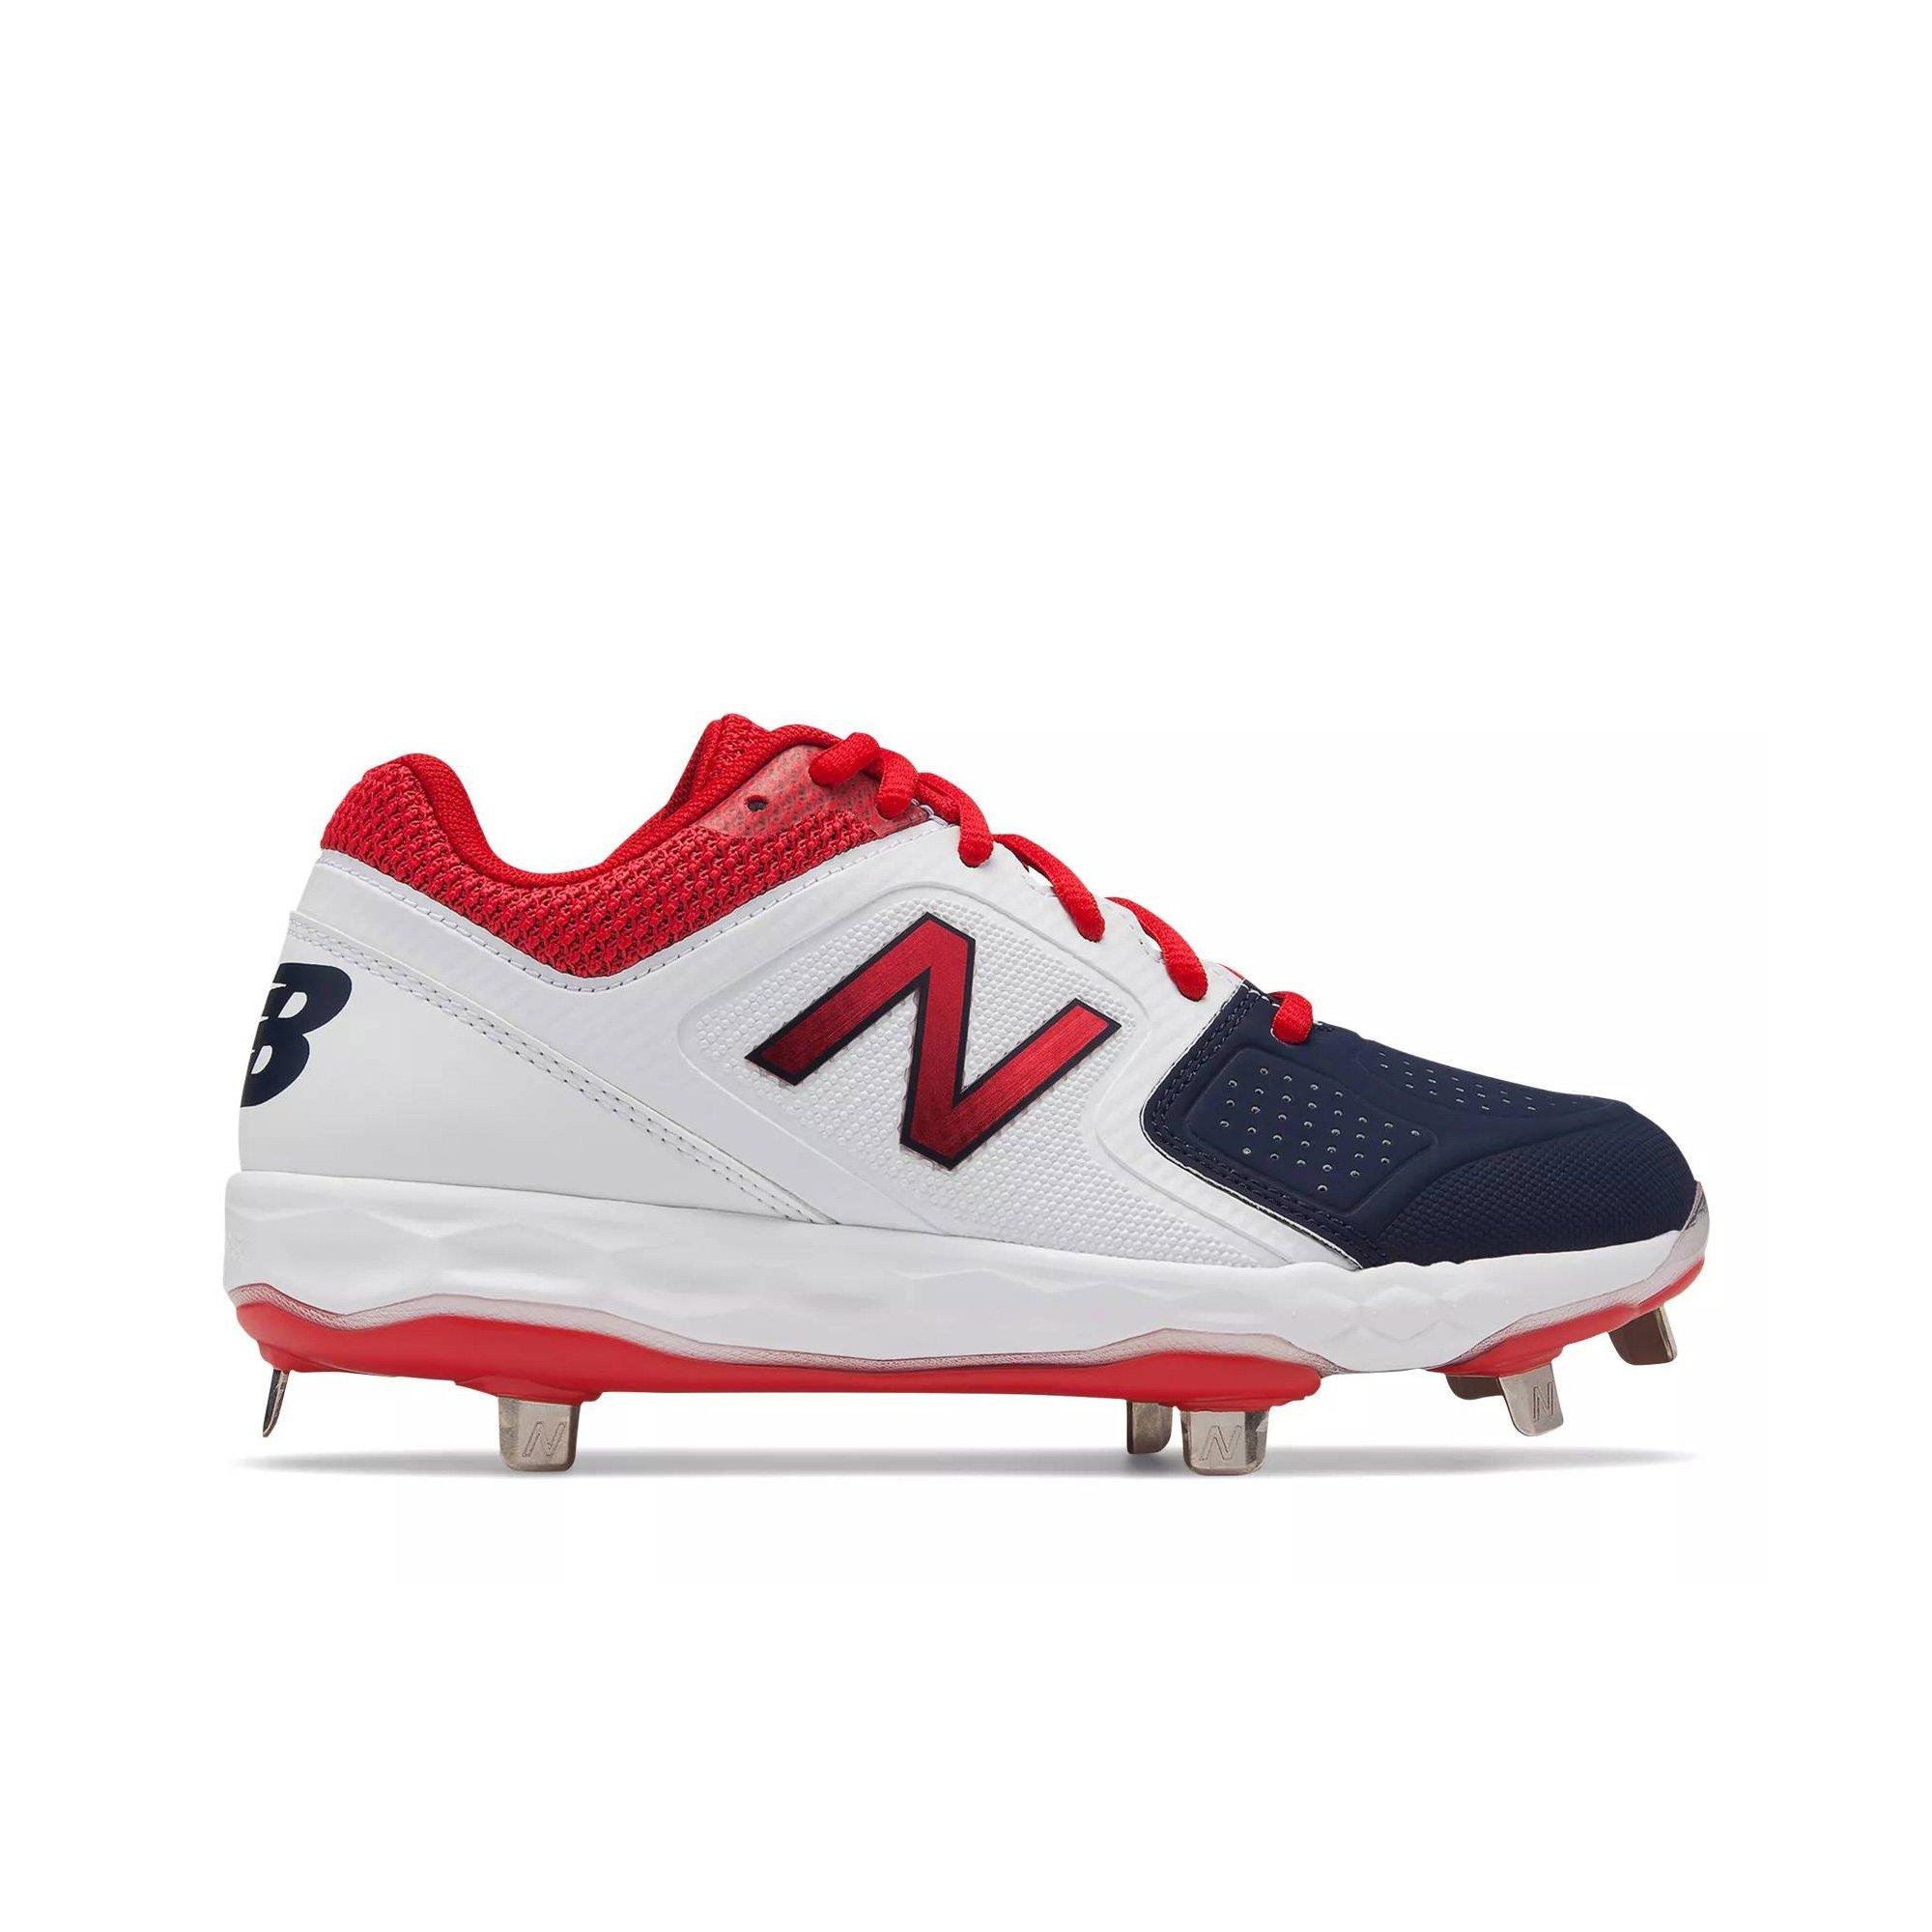 red white and blue softball cleats